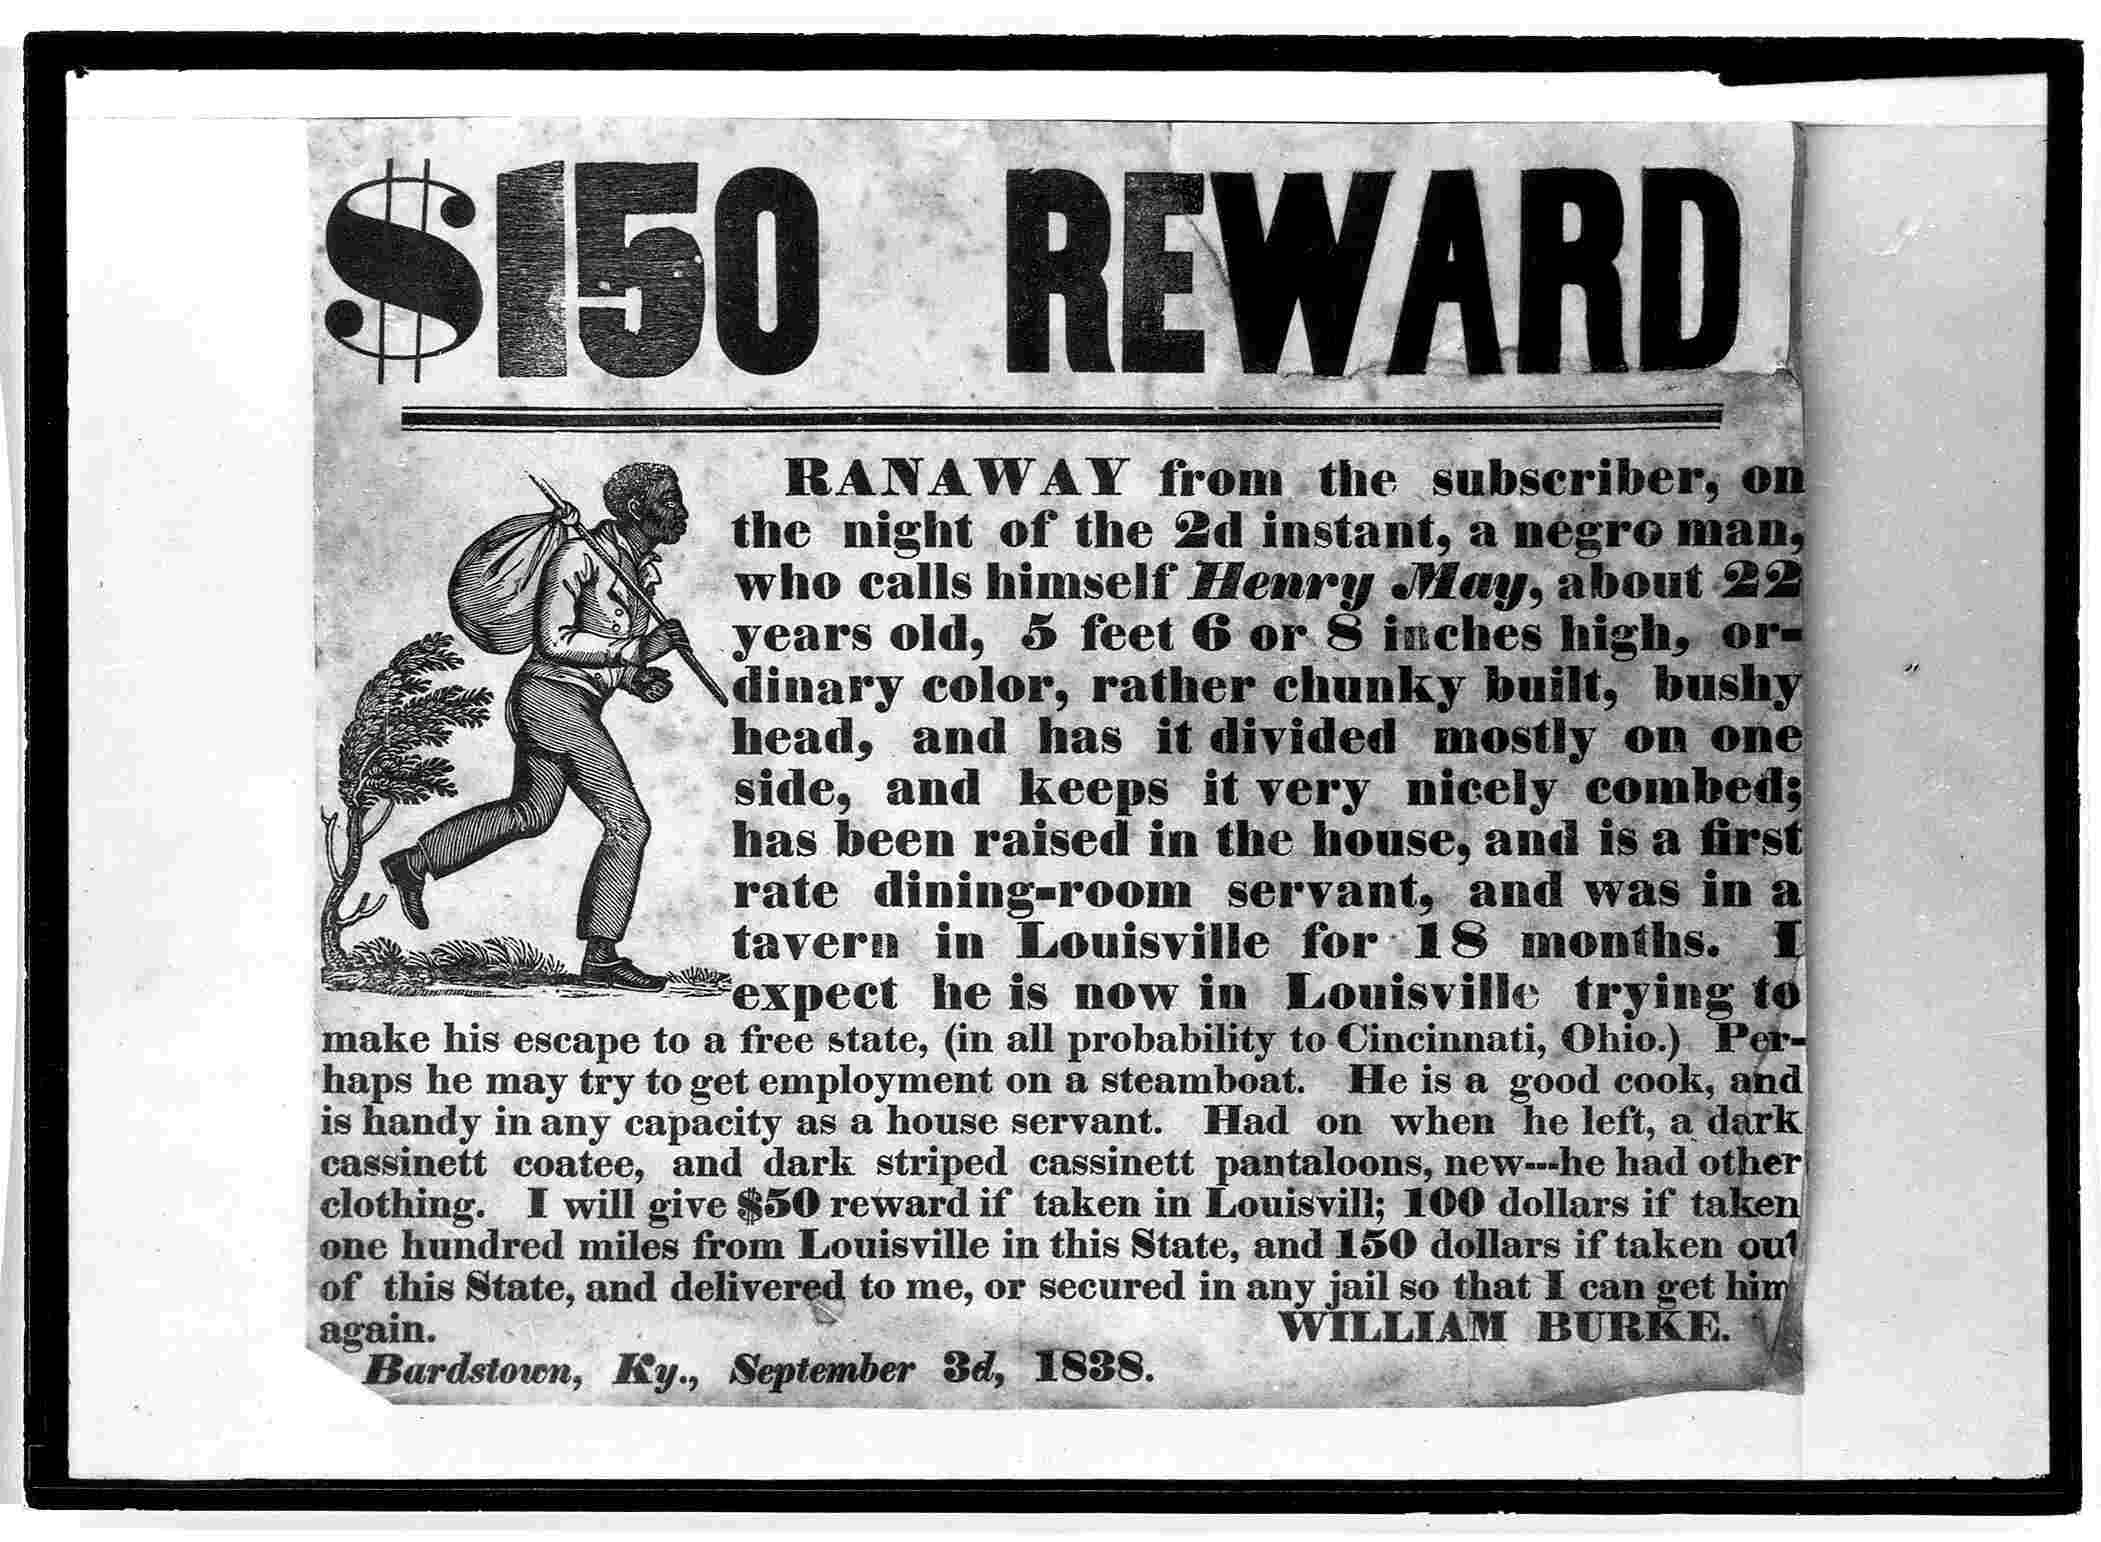 harriet tubman wanted poster 40000